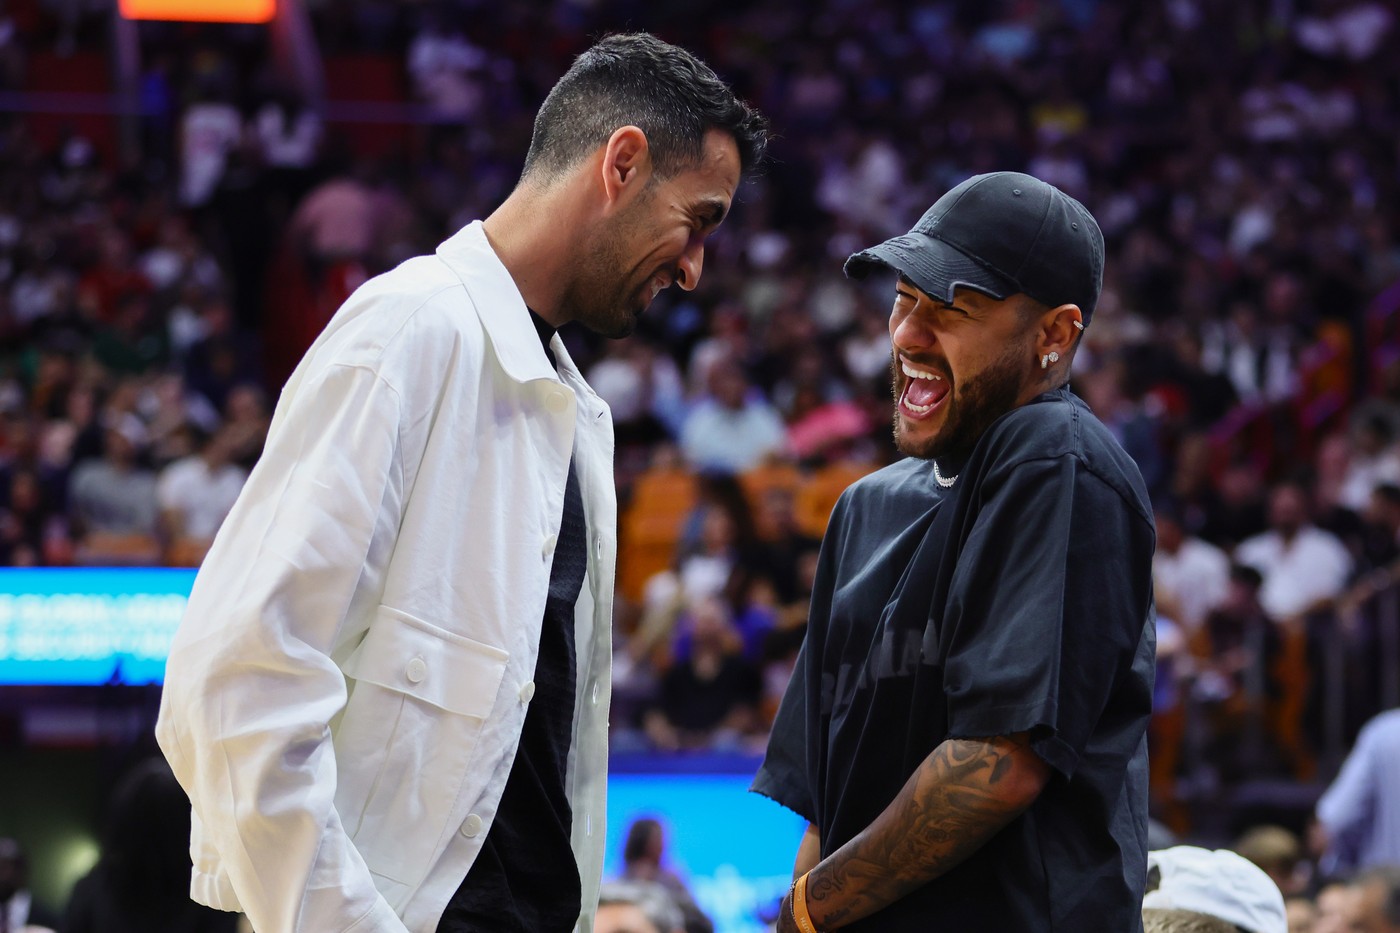 Mar 26, 2024; Miami, Florida, USA; Inter Miami CF midfielder Sergio Busquets and Brazilian soccer player Neymar Jr. attend the game between the Miami Heat and the Golden State Warriors at Kaseya Center.,Image: 859905904, License: Rights-managed, Restrictions: , Model Release: no